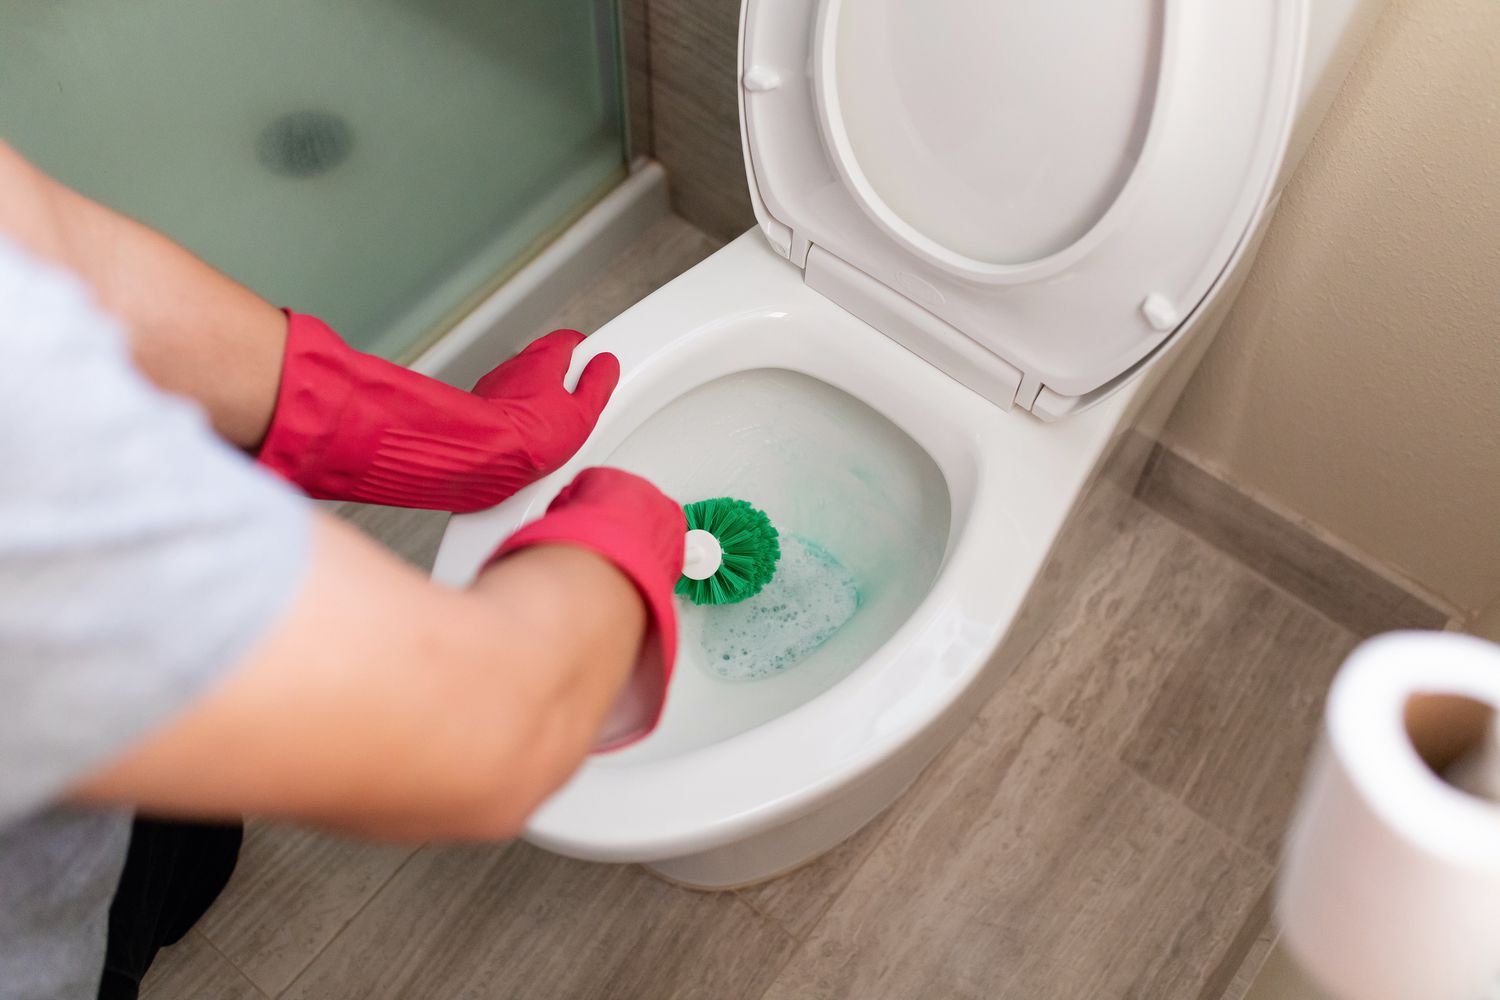 use a toilet brush to clean the inside of the toilet bowl